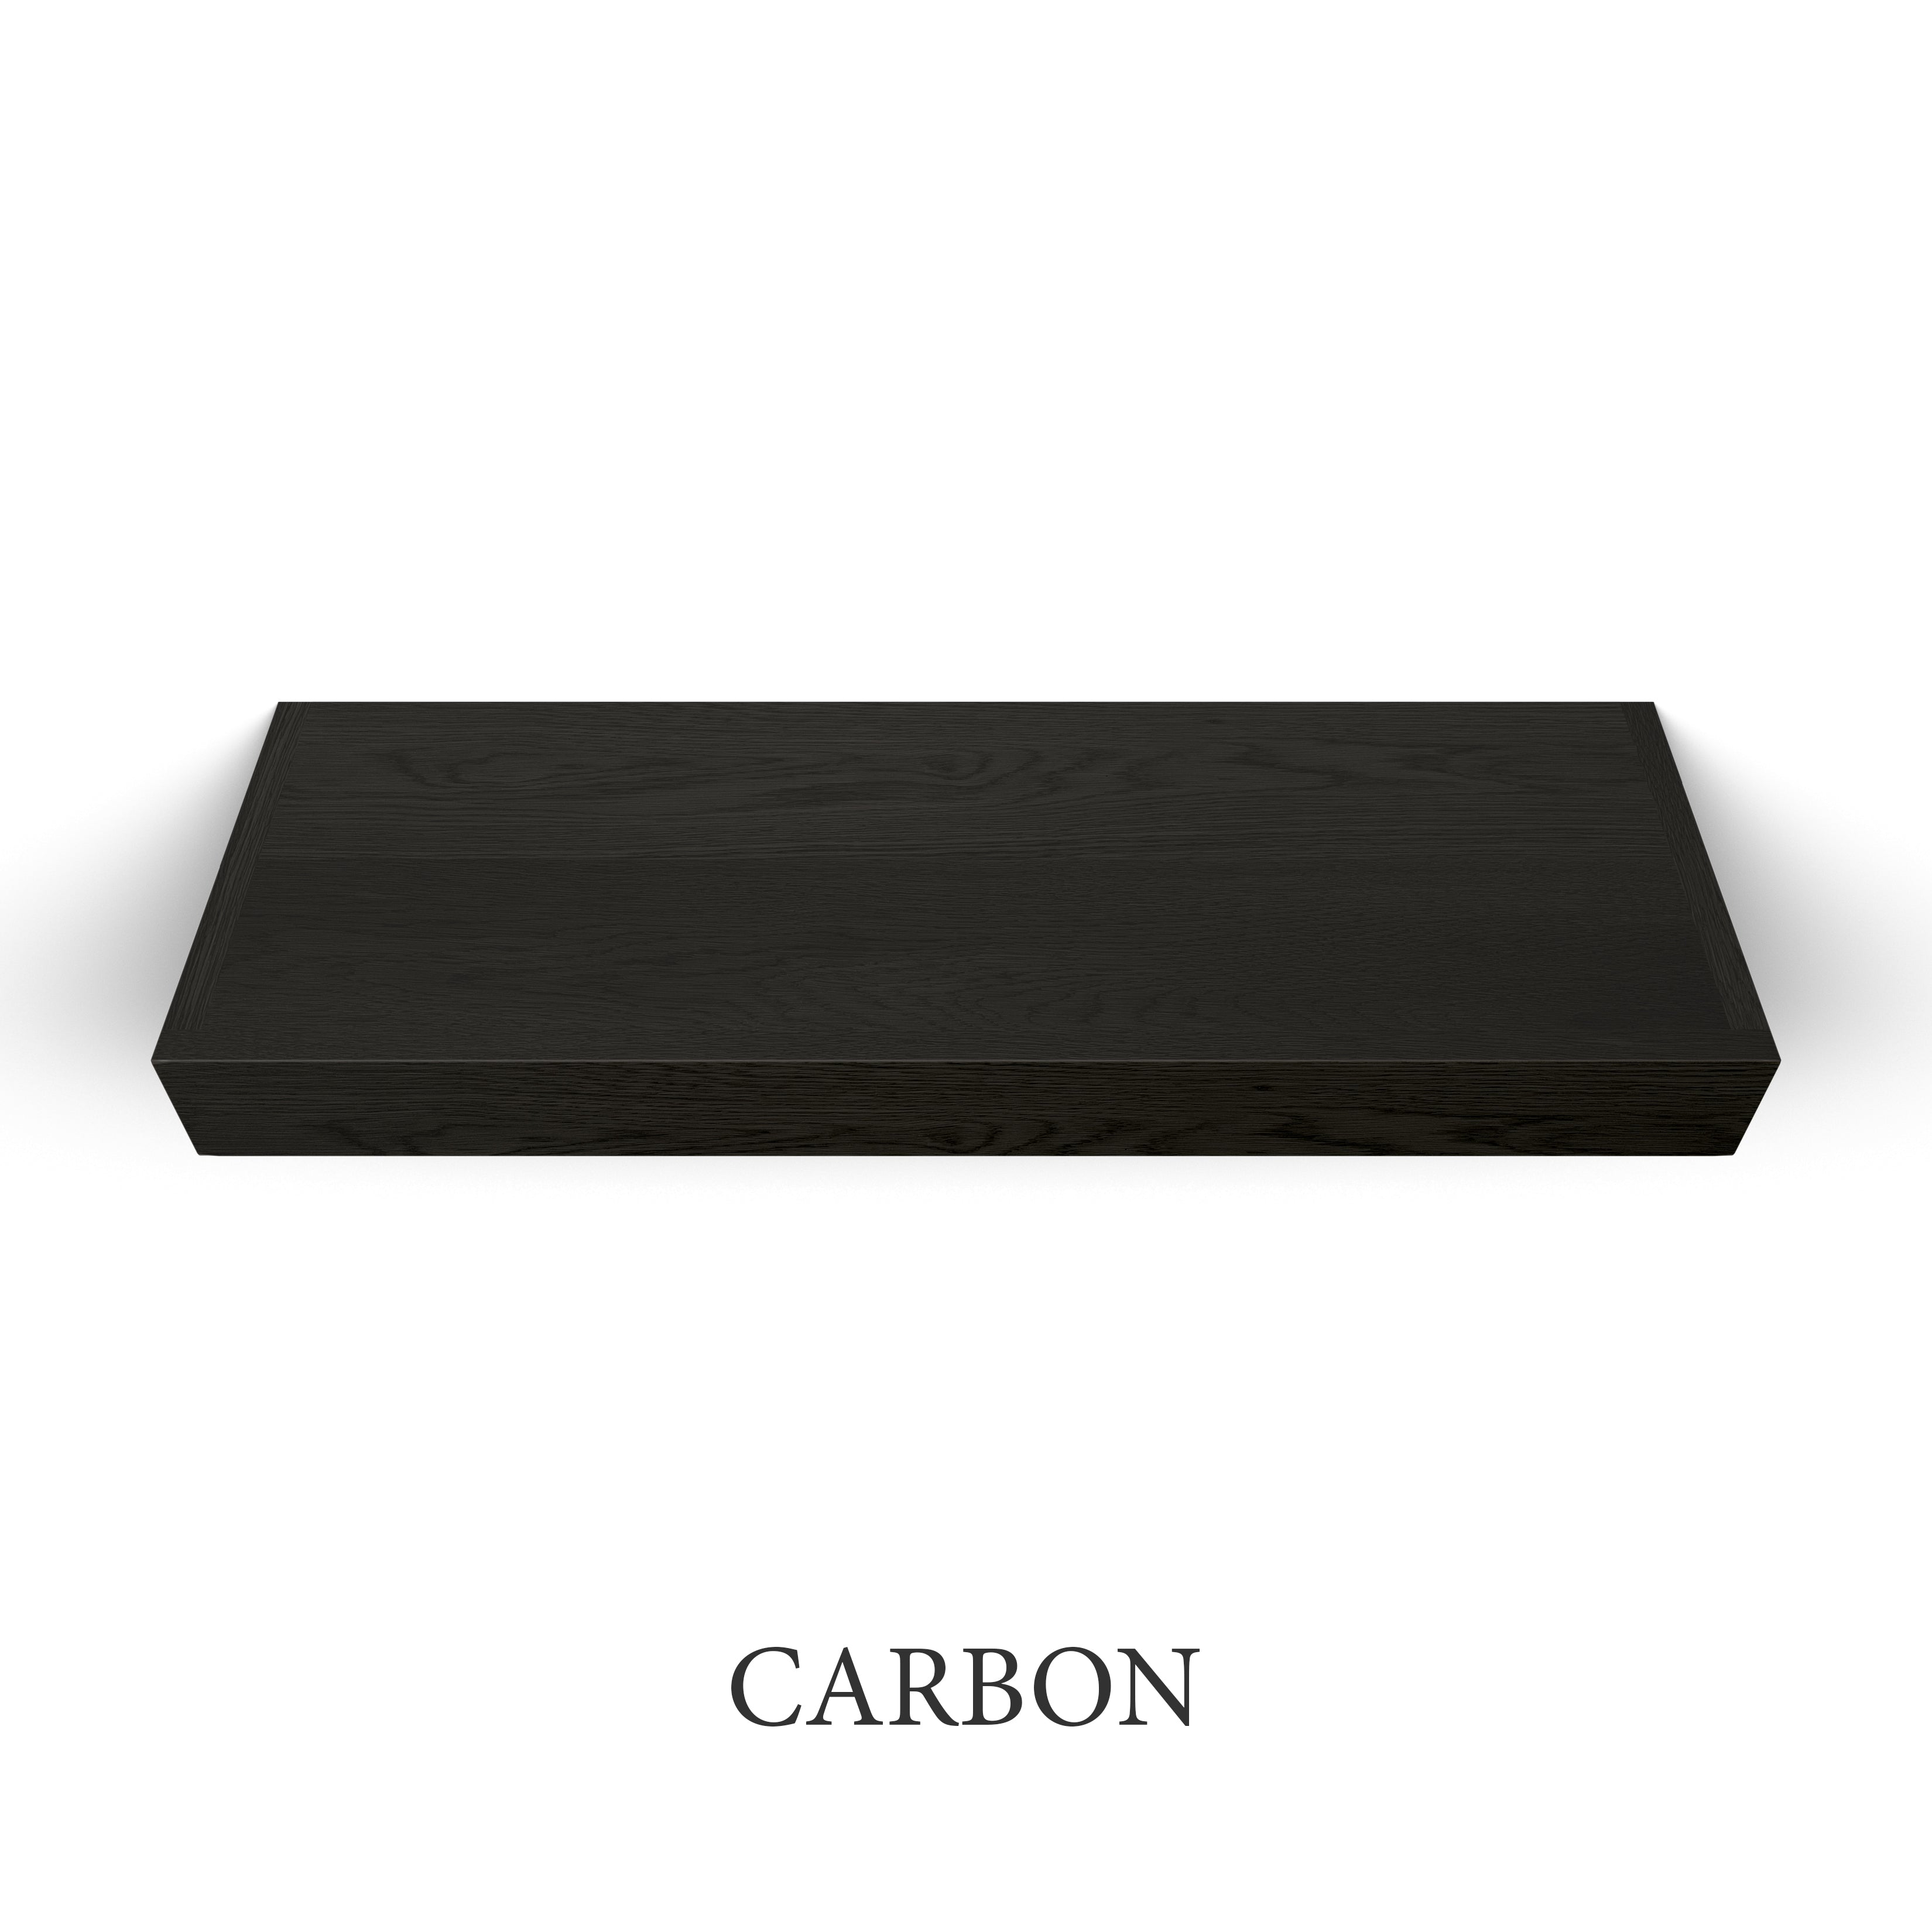 carbon White Oak 3 Inch Thick LED Lighted Floating Shelf - Battery